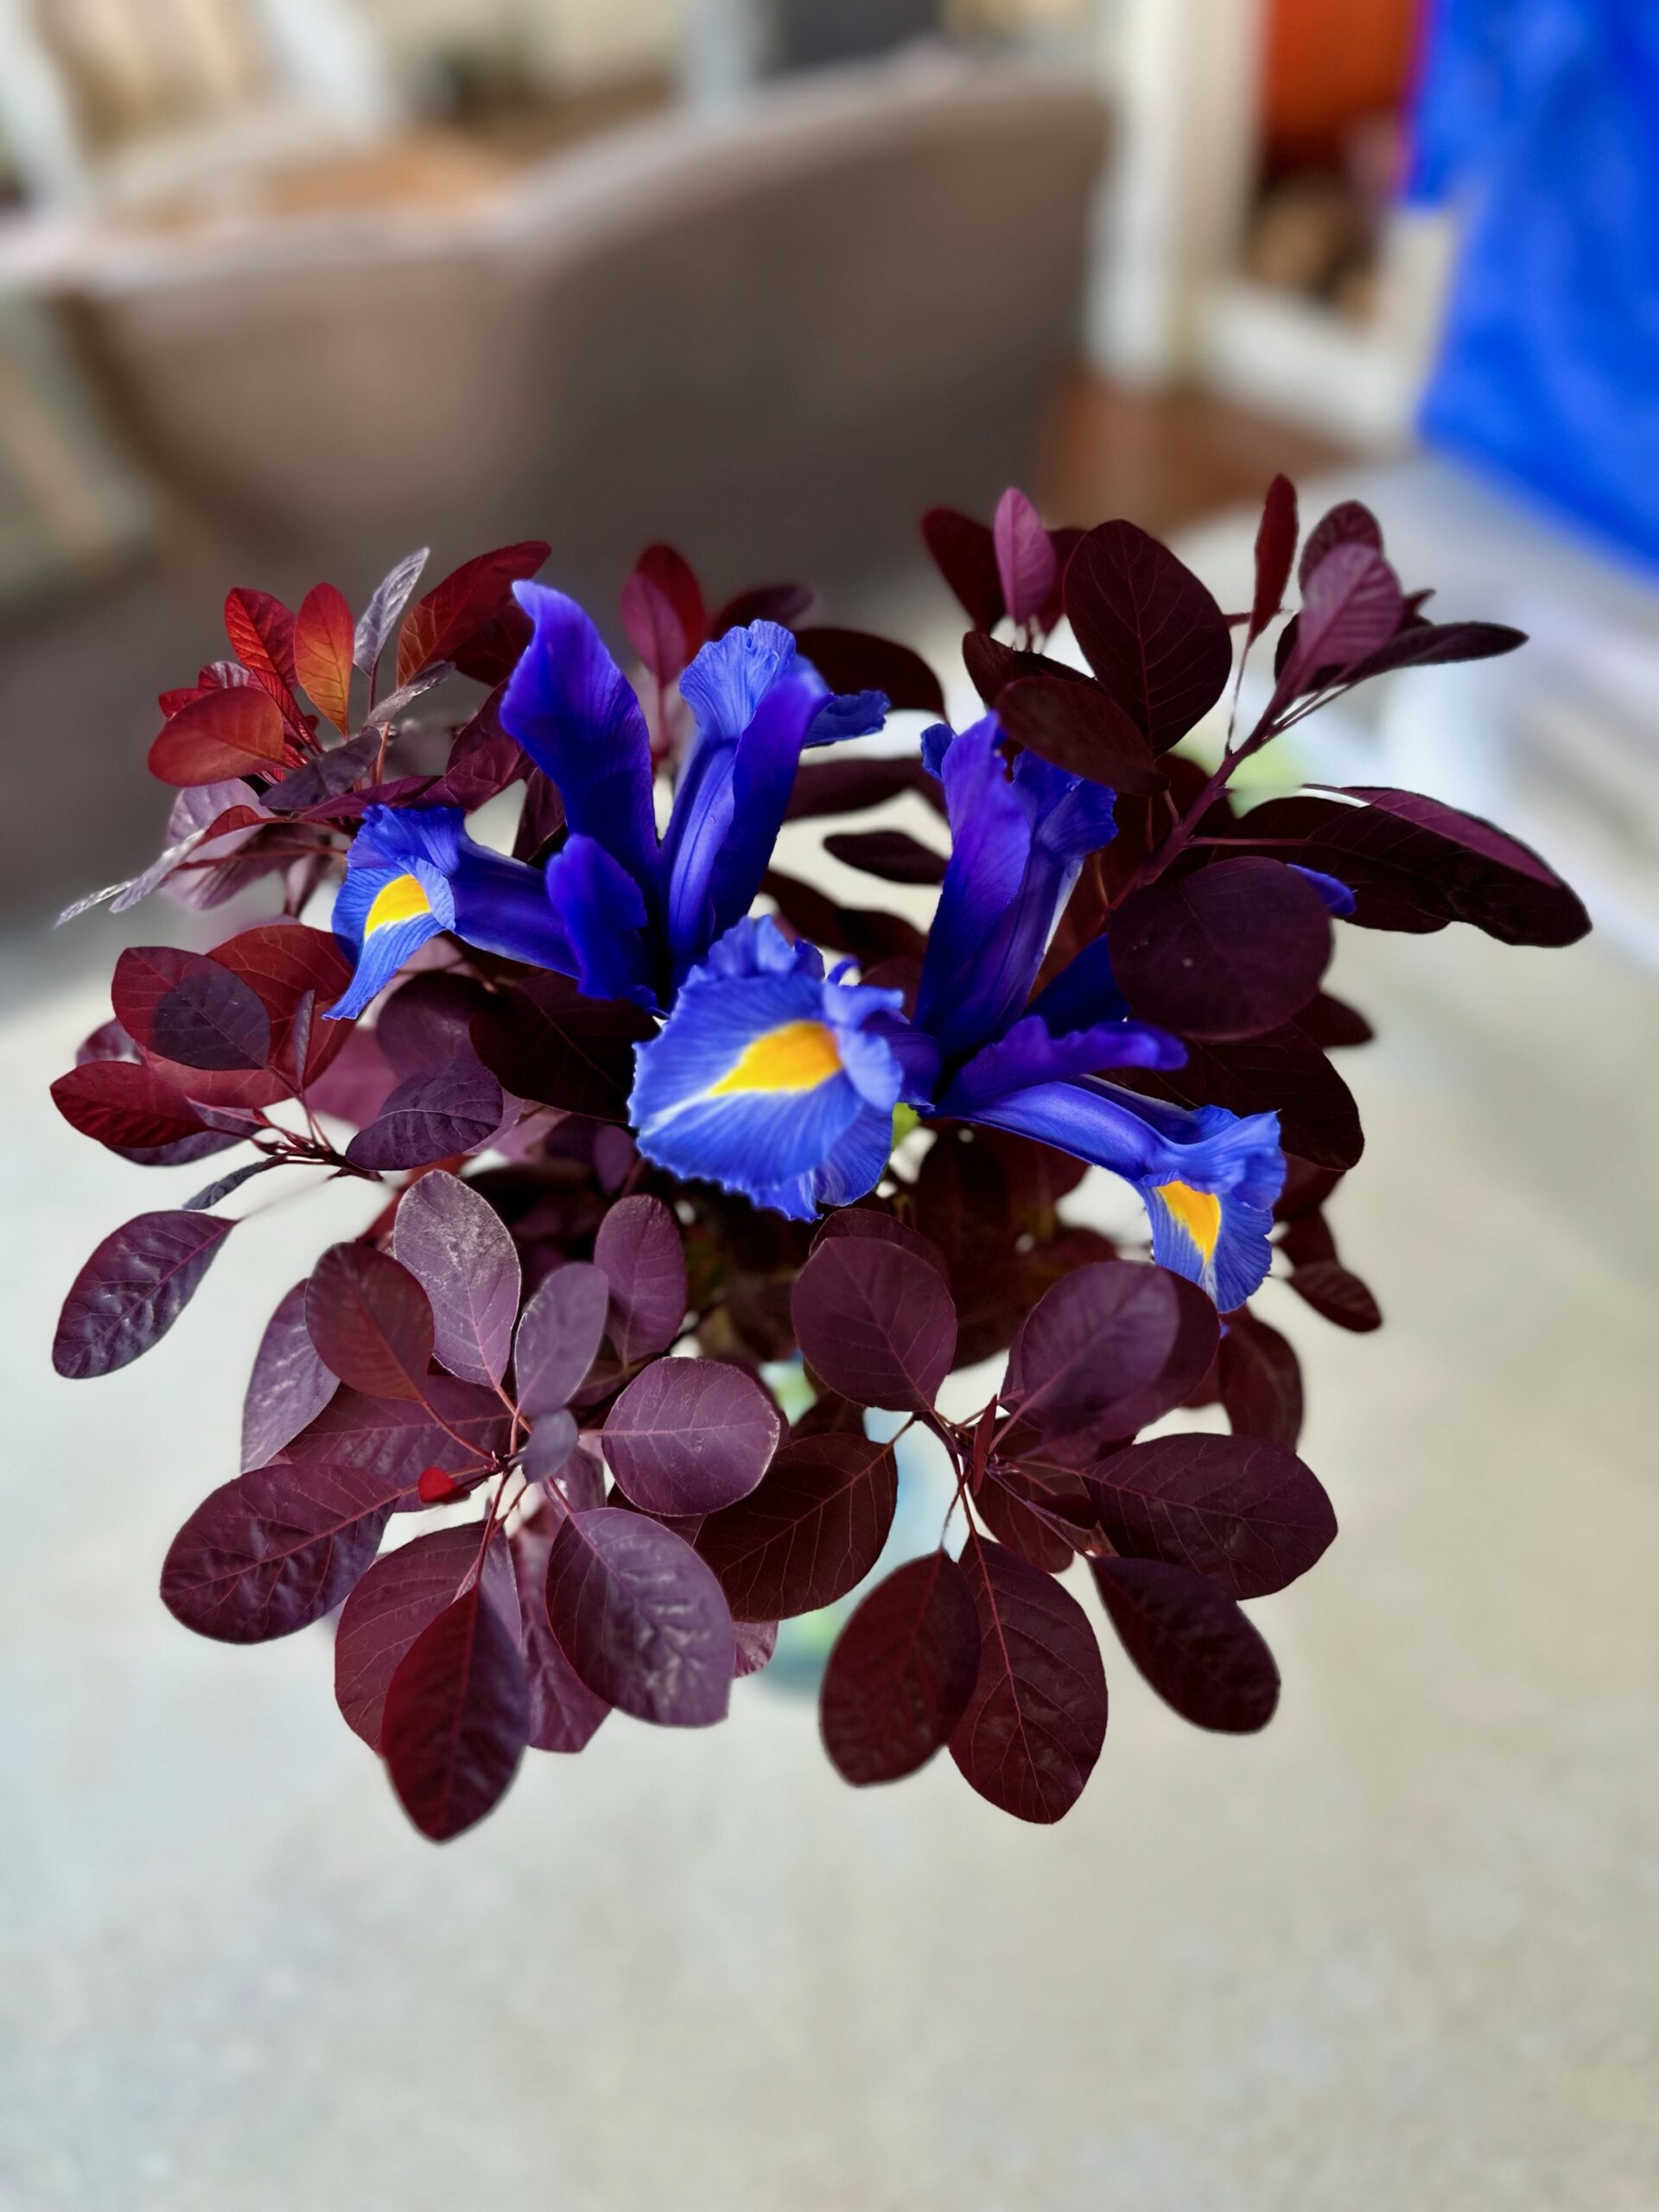 vase with bright blue flowers and dark red foliage